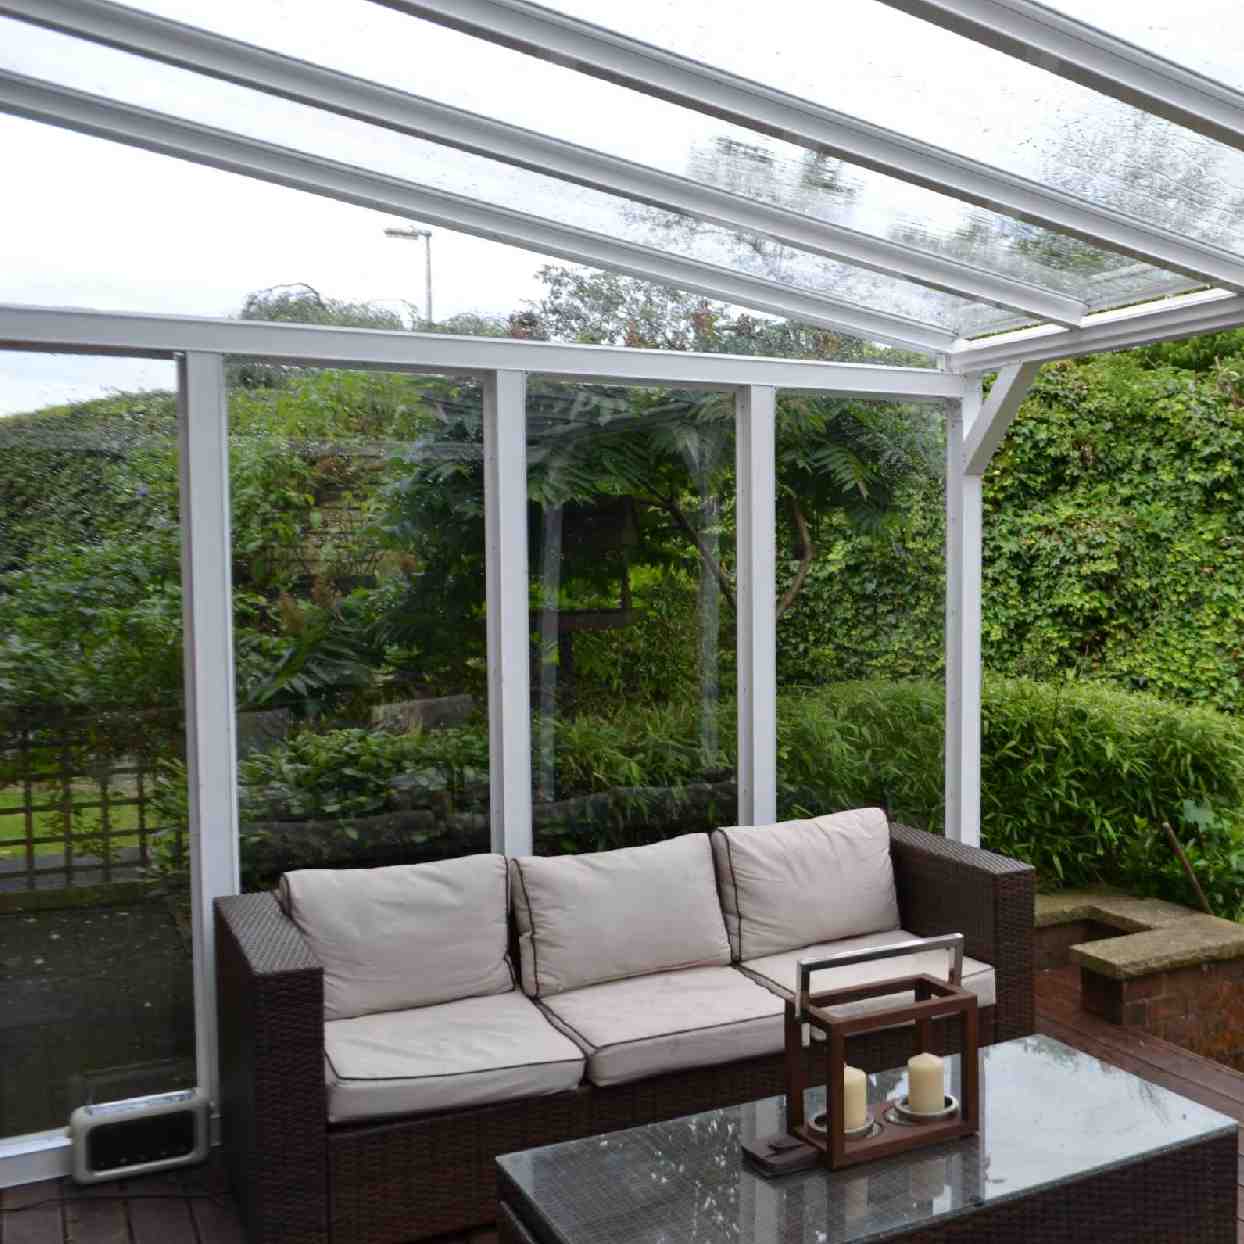 Buy Omega Verandah White with 6mm Glass Clear Plate Polycarbonate Glazing - 4.2m (W) x 3.0m (P), (3) Supporting Posts online today